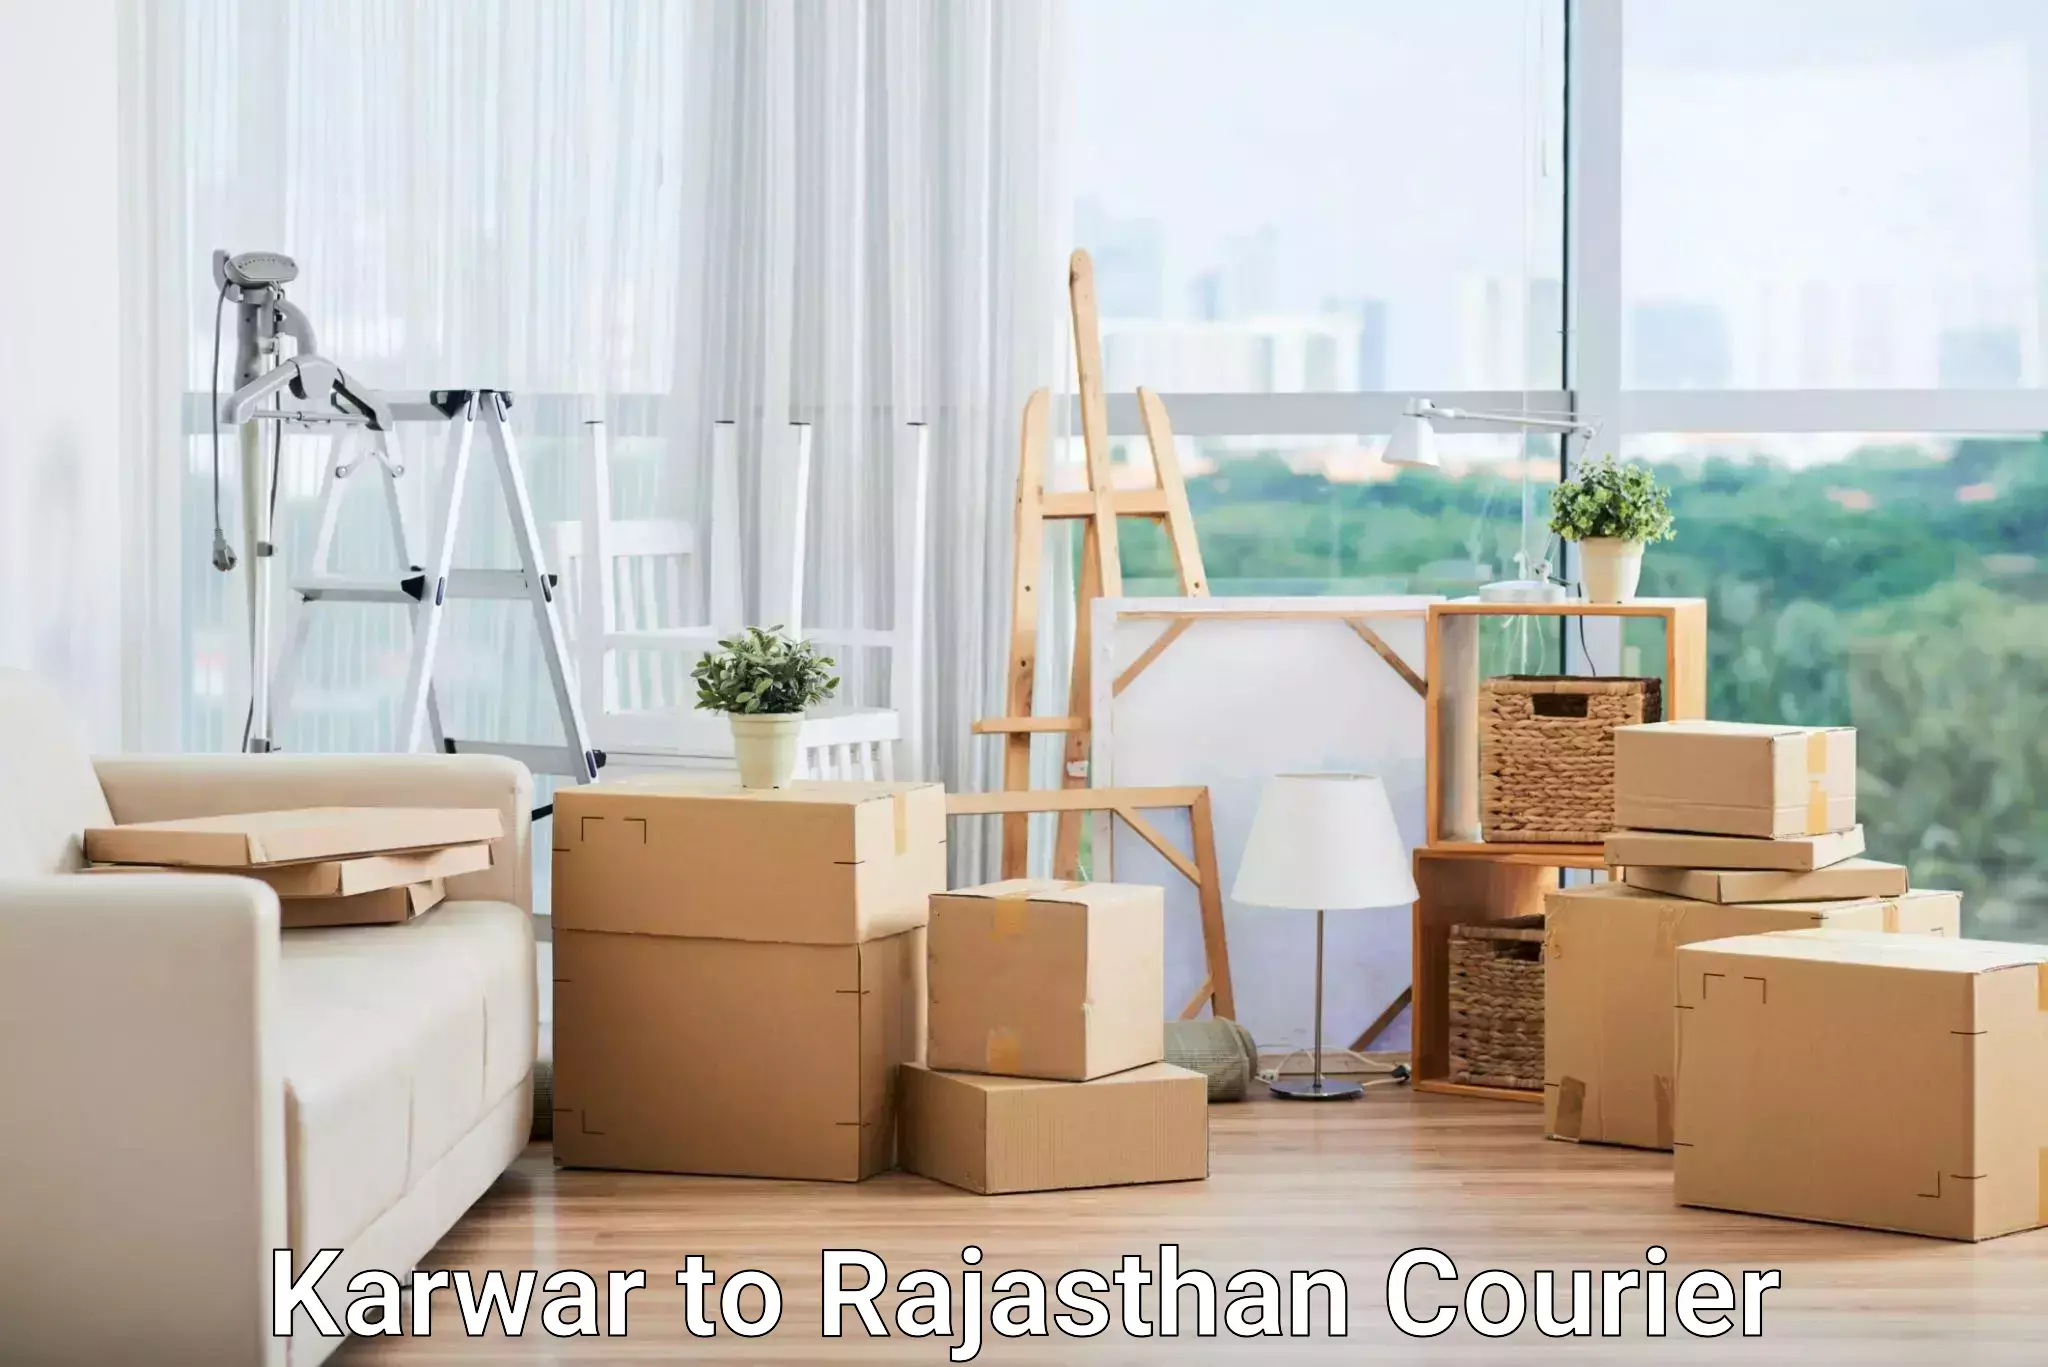 Subscription-based courier Karwar to Rajasthan